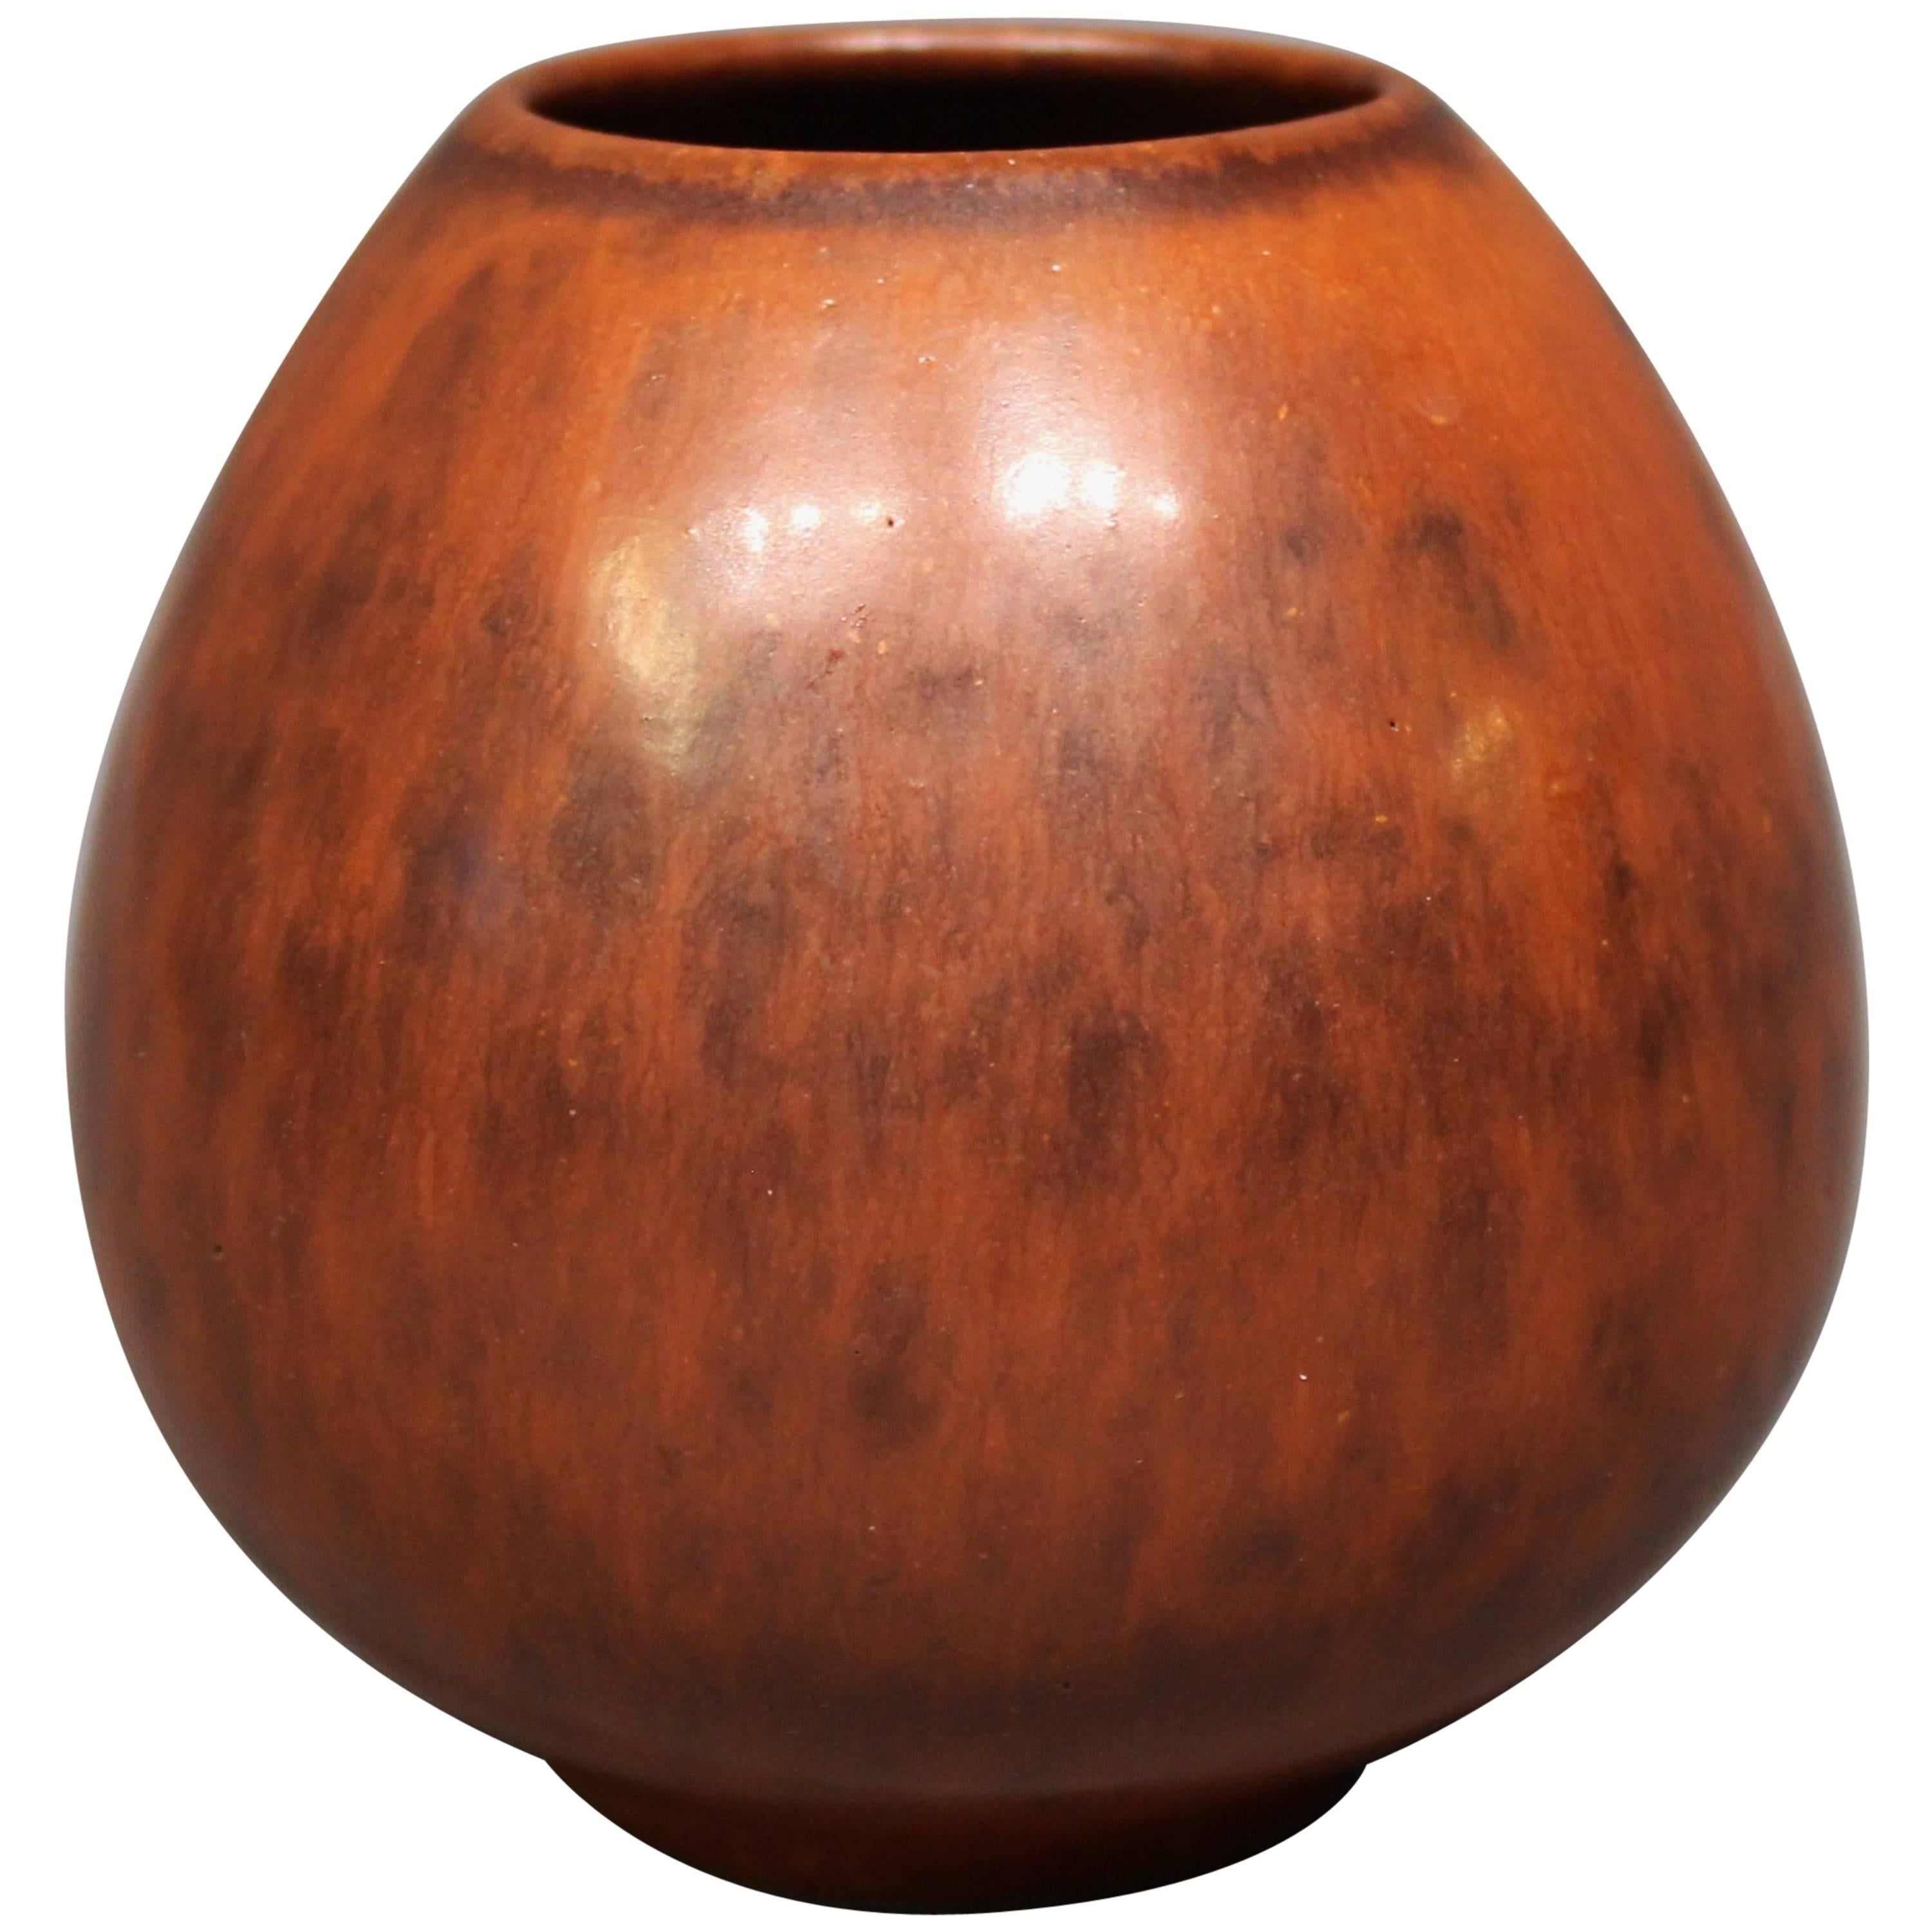 Ceramic Vase with a Light Brown Glaze, No.: 1 by Saxbo